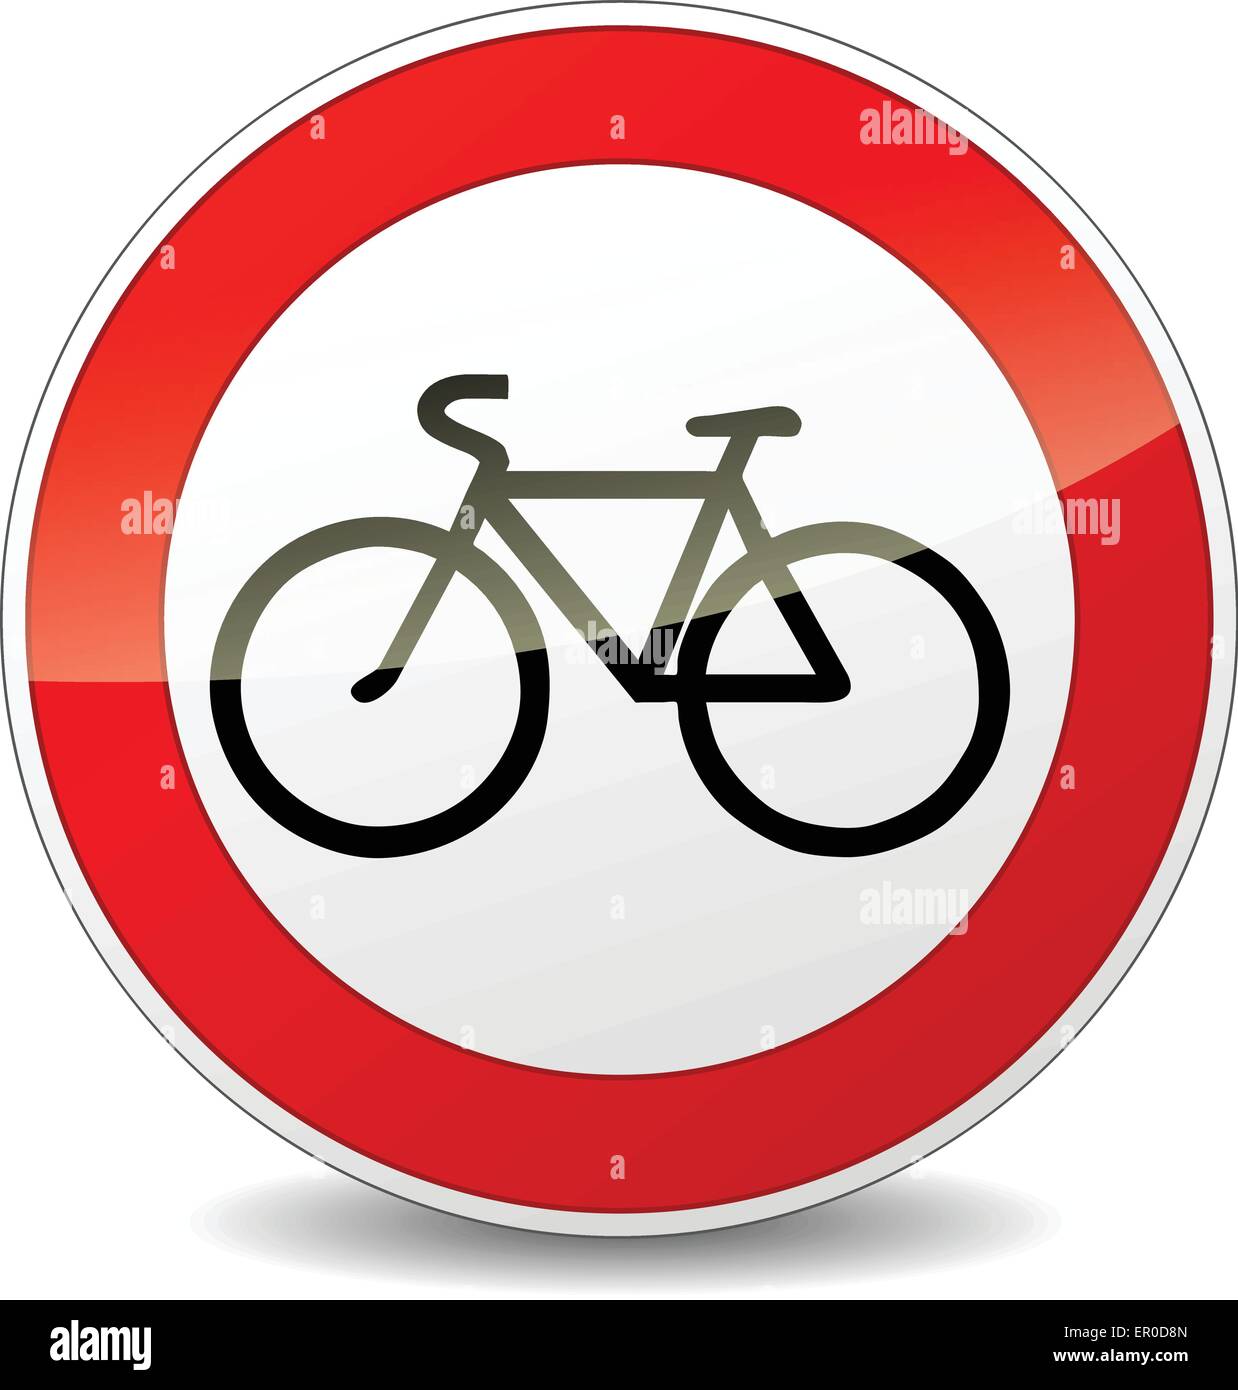 Illustration of bicycle round sign on white background Stock Vector